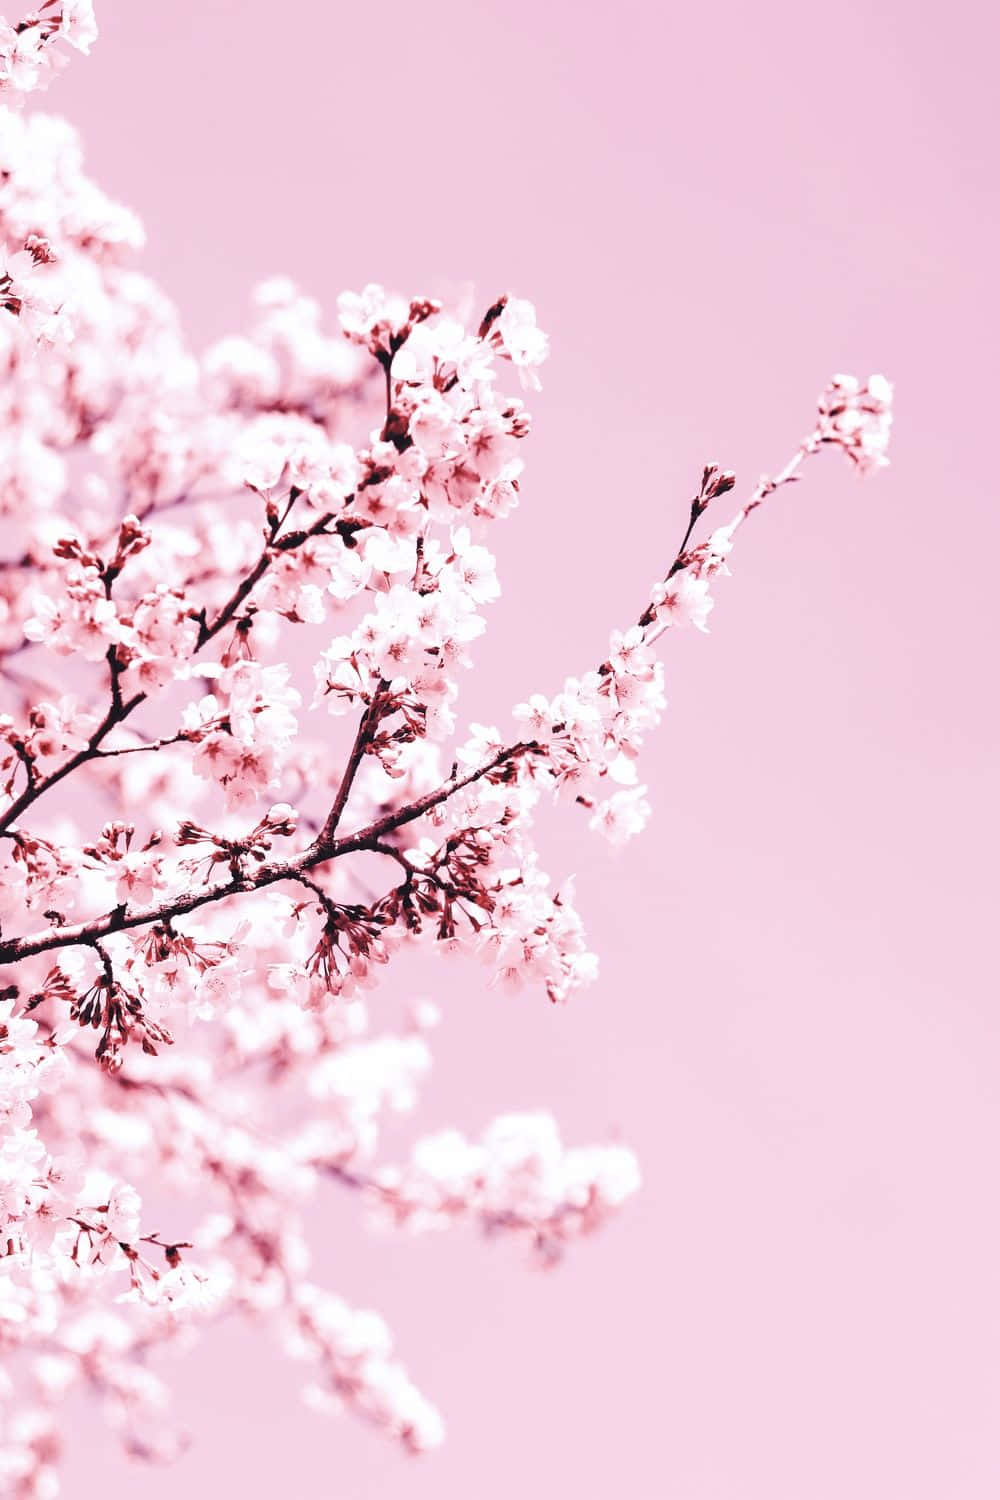 A Pink Cherry Blossom Tree Against A Pink Background